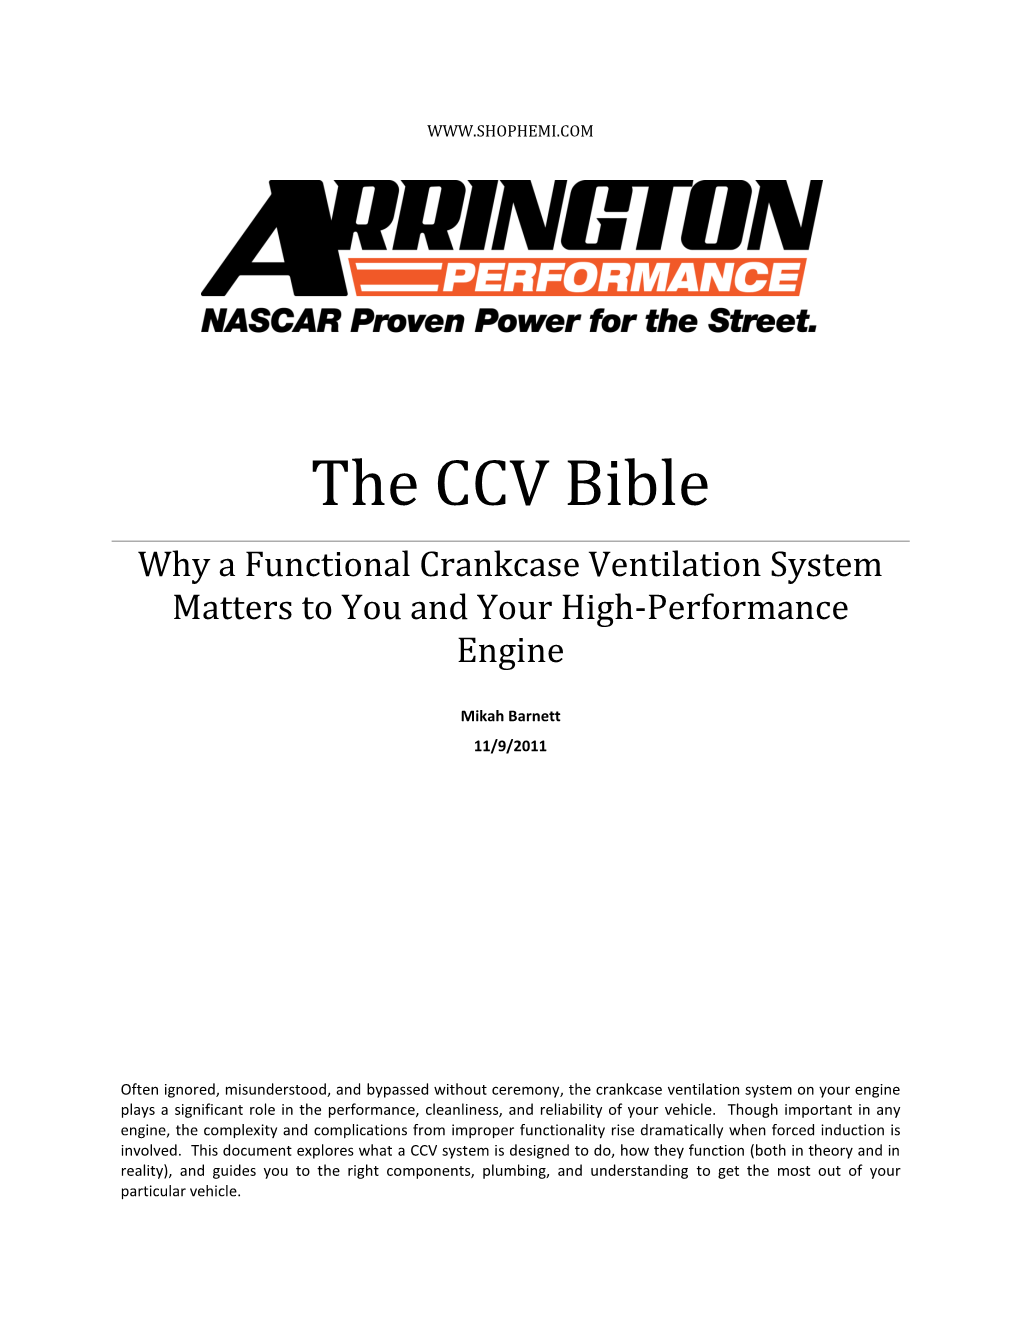 The CCV Bible Why a Functional Crankcase Ventilation System Matters to You and Your High-Performance Engine